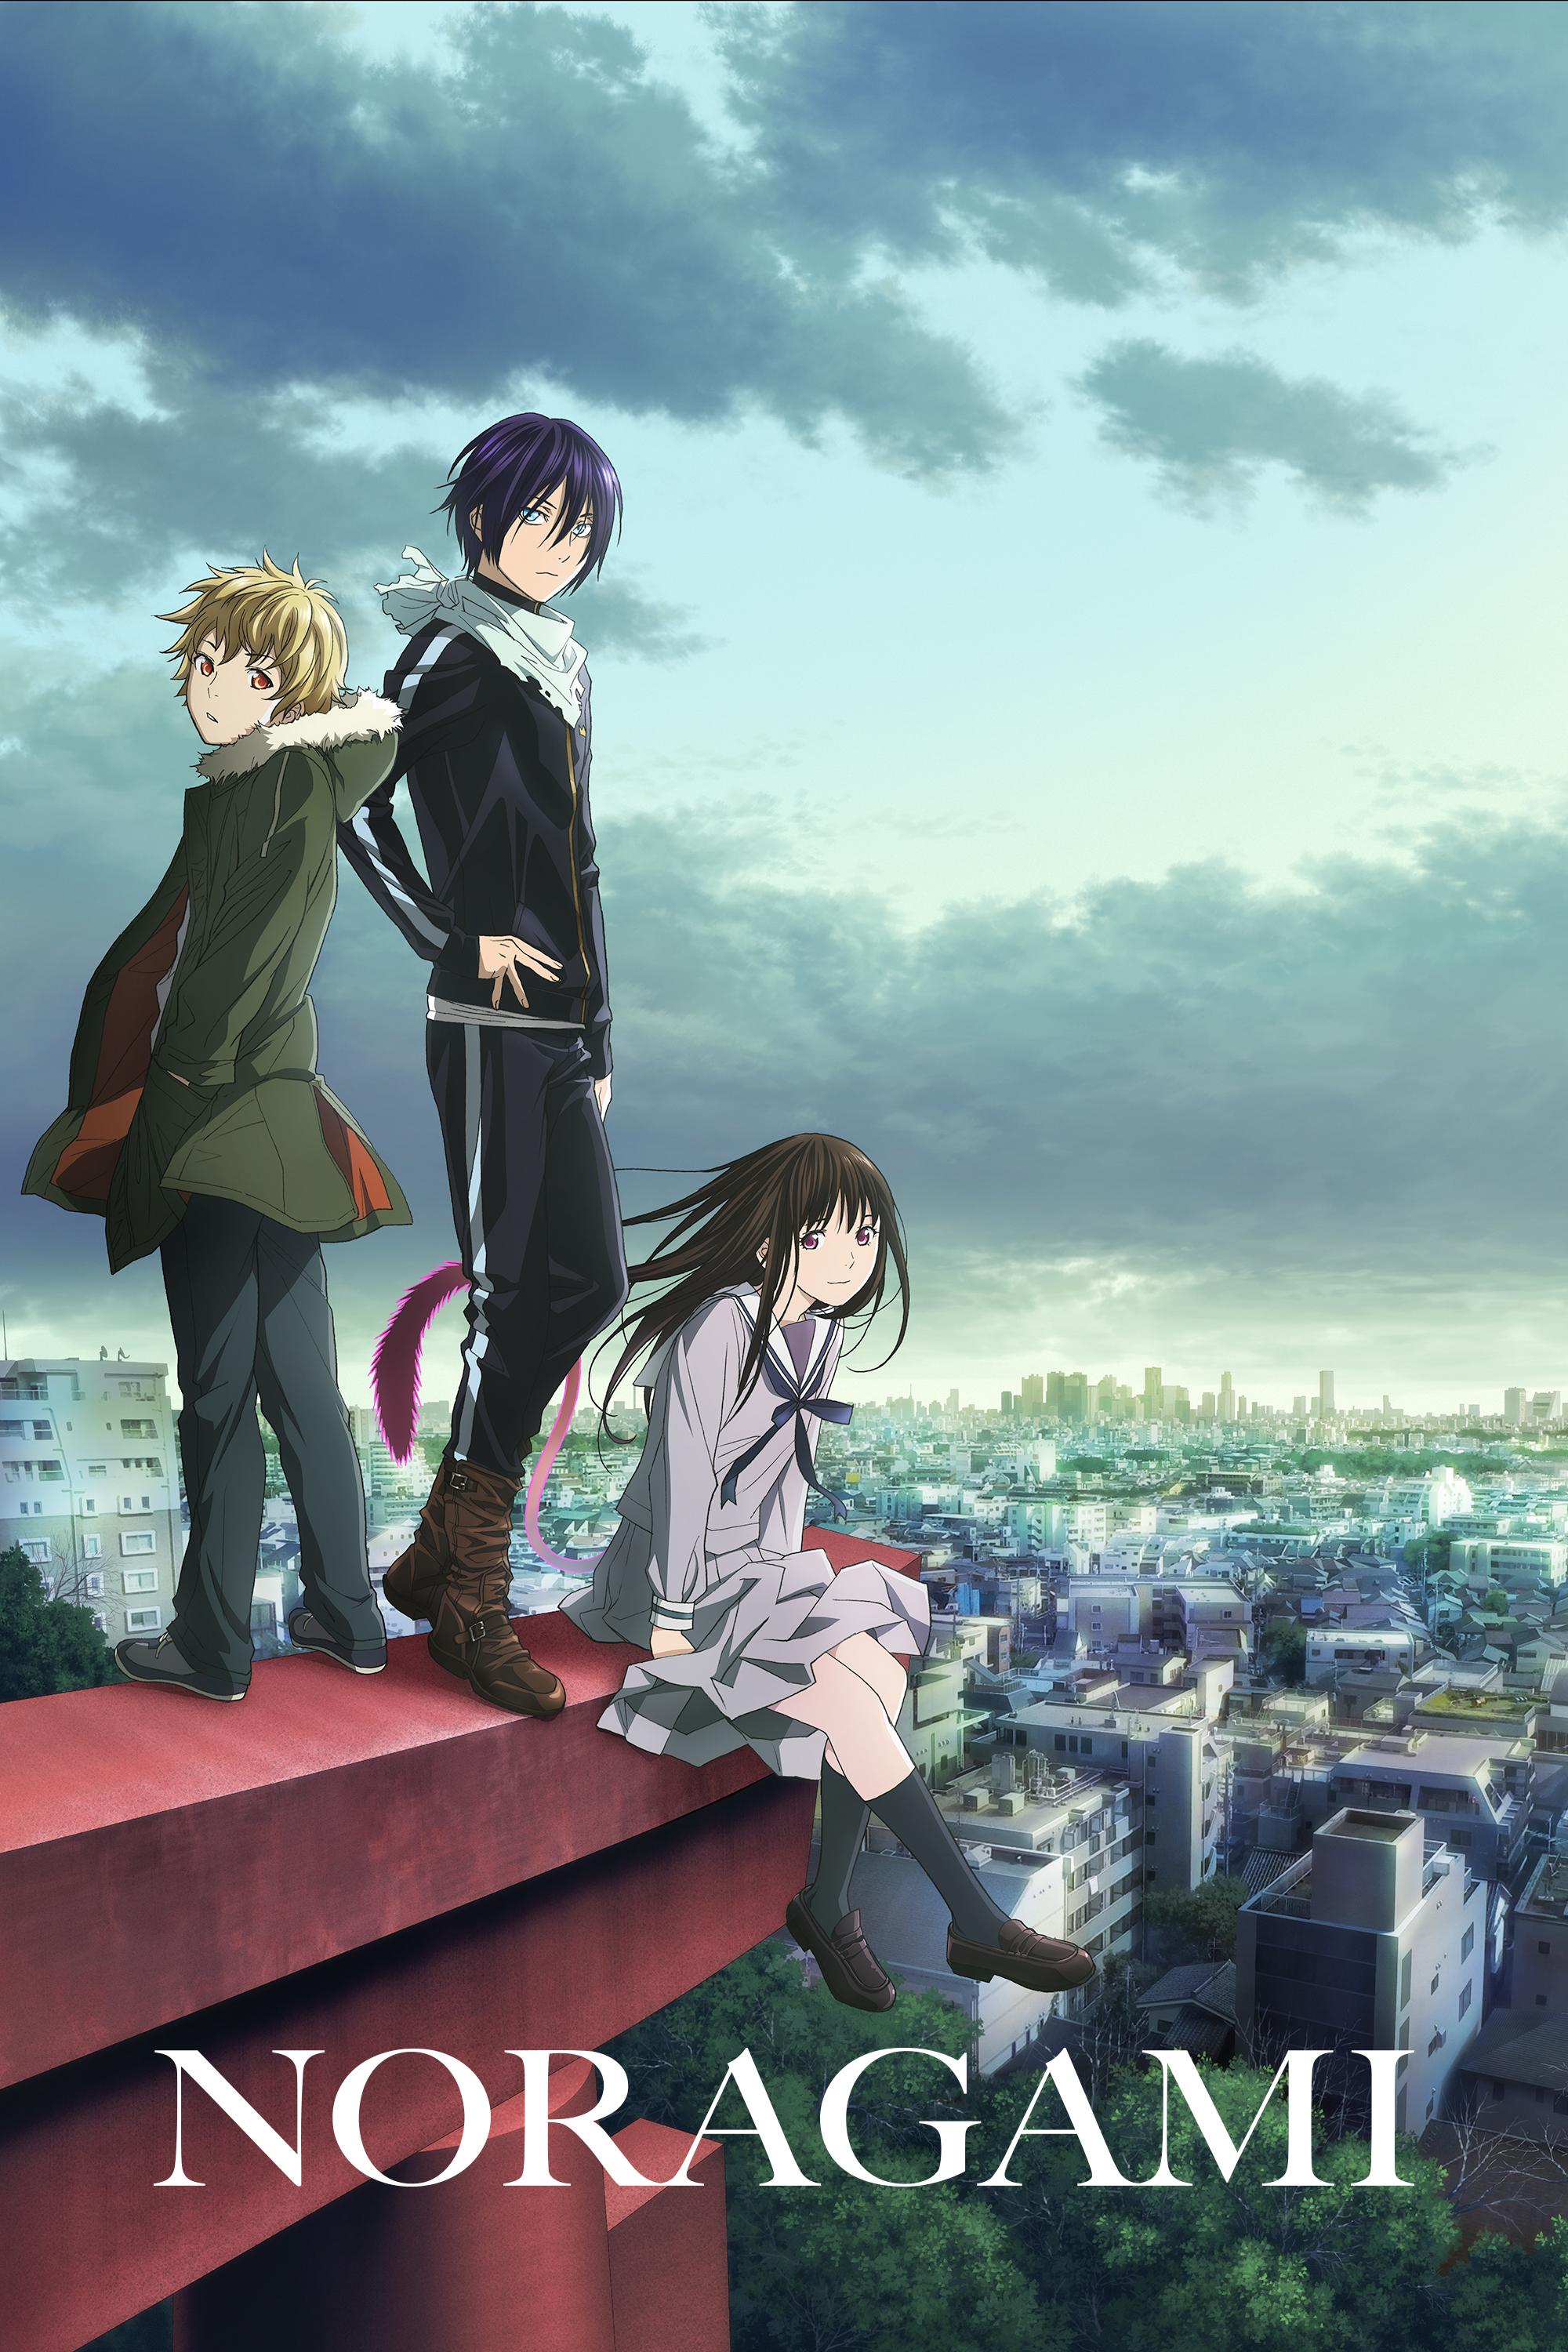 Watch Noragami Sub Dub Action Adventure Comedy Drama Fantasy Anime Funimation Noragami 08 vostfr 0 out of 5 based on 0 ratings. watch noragami sub dub action